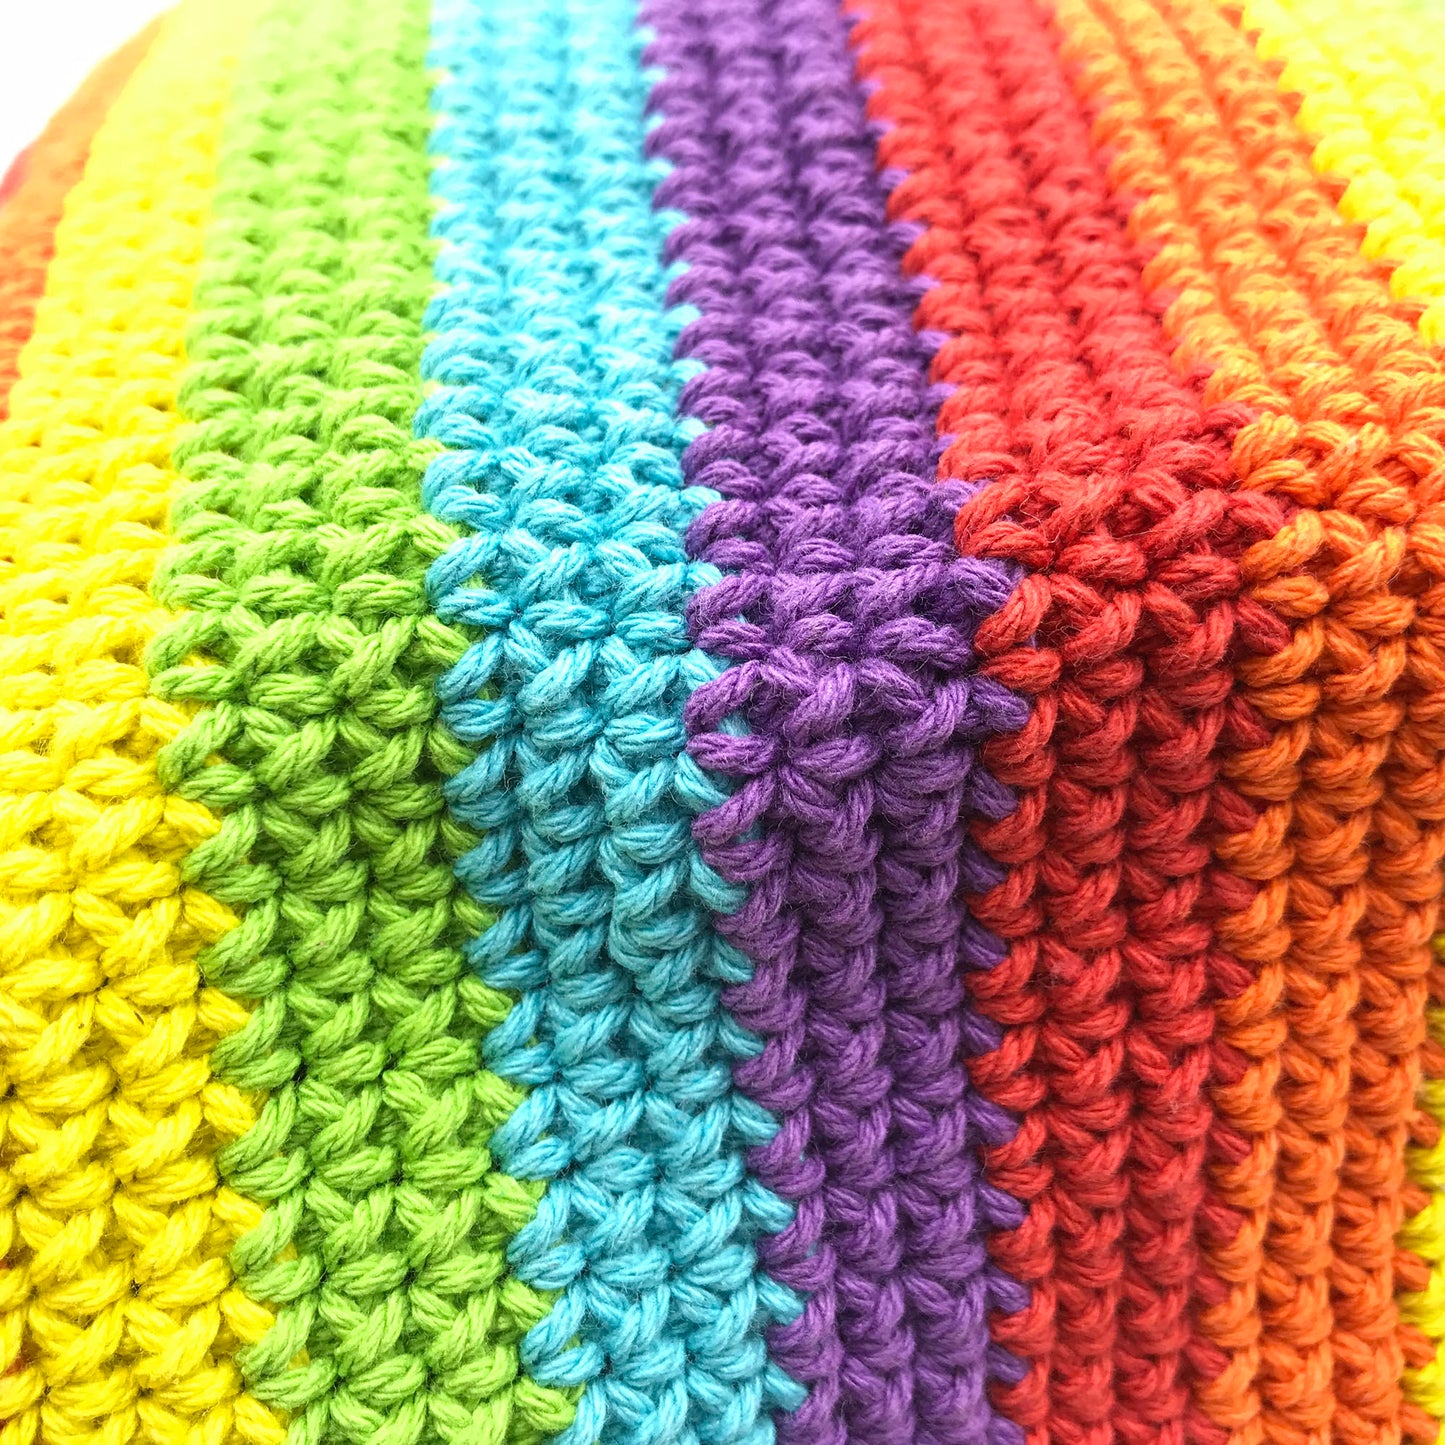 Crochet Rainbow Jhola Bag hand-crafted with Crochet work